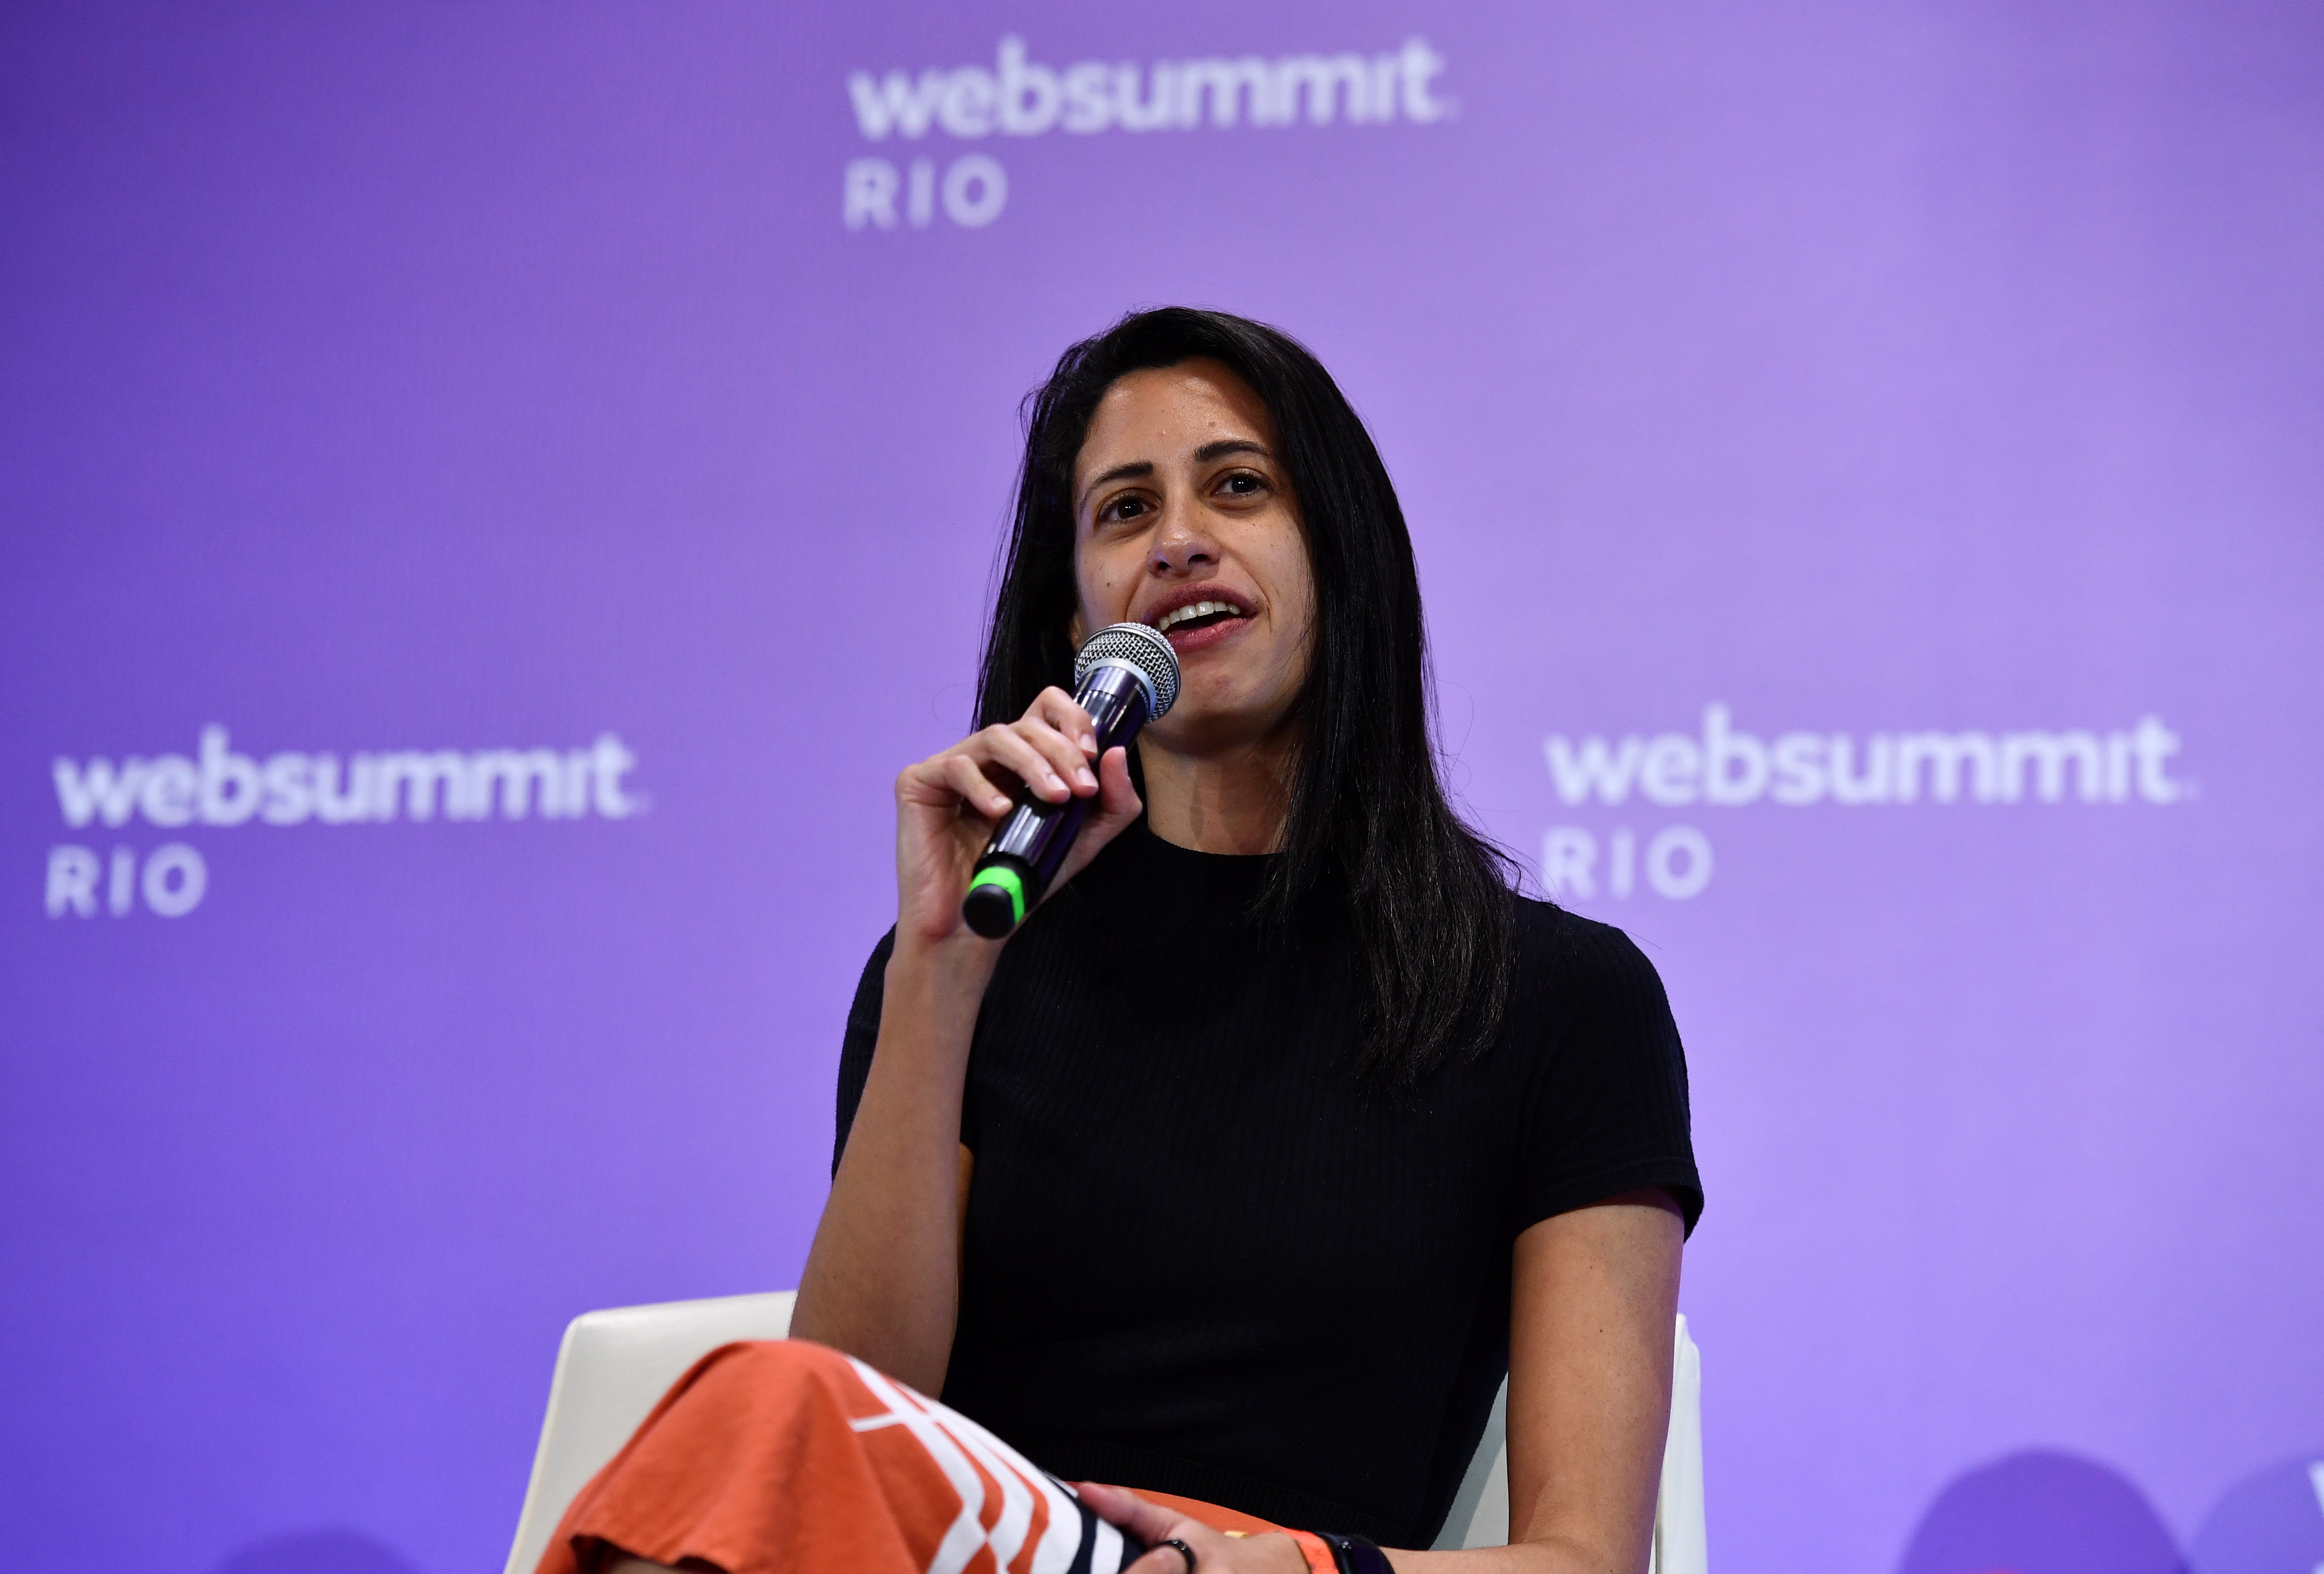 A person (Canary partner Izabel Gallera) sitting in an armchair on a stage. They are holding a microphone in their right hand, and appear to be speaking. The Web Summit Rio logo is visible in several places on the wall behind them.